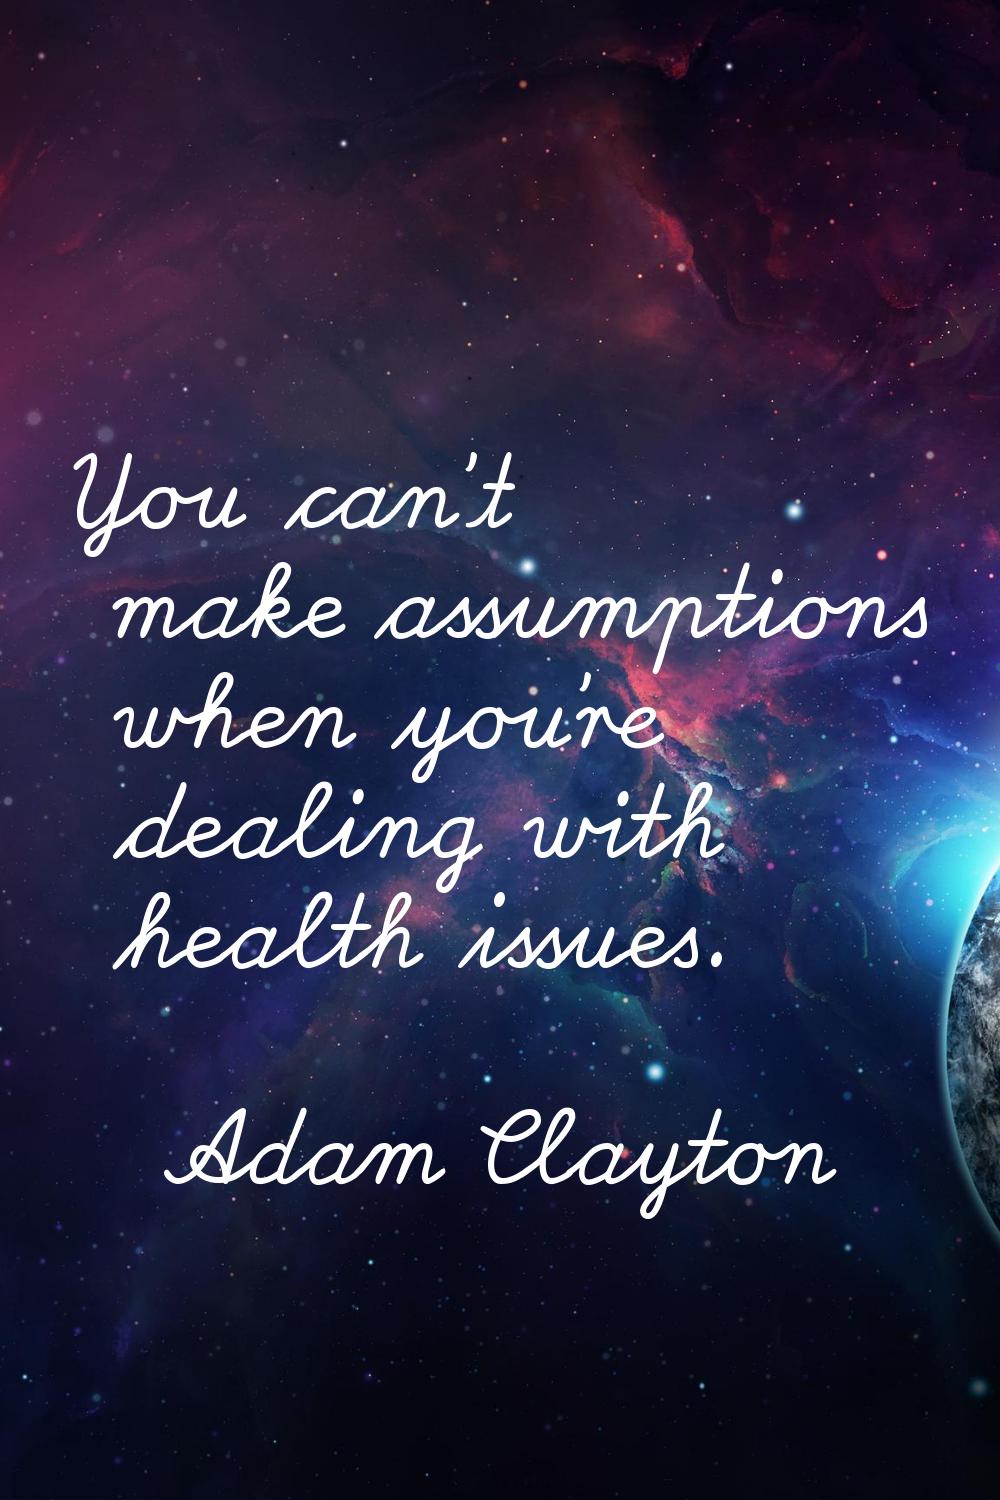 You can't make assumptions when you're dealing with health issues.